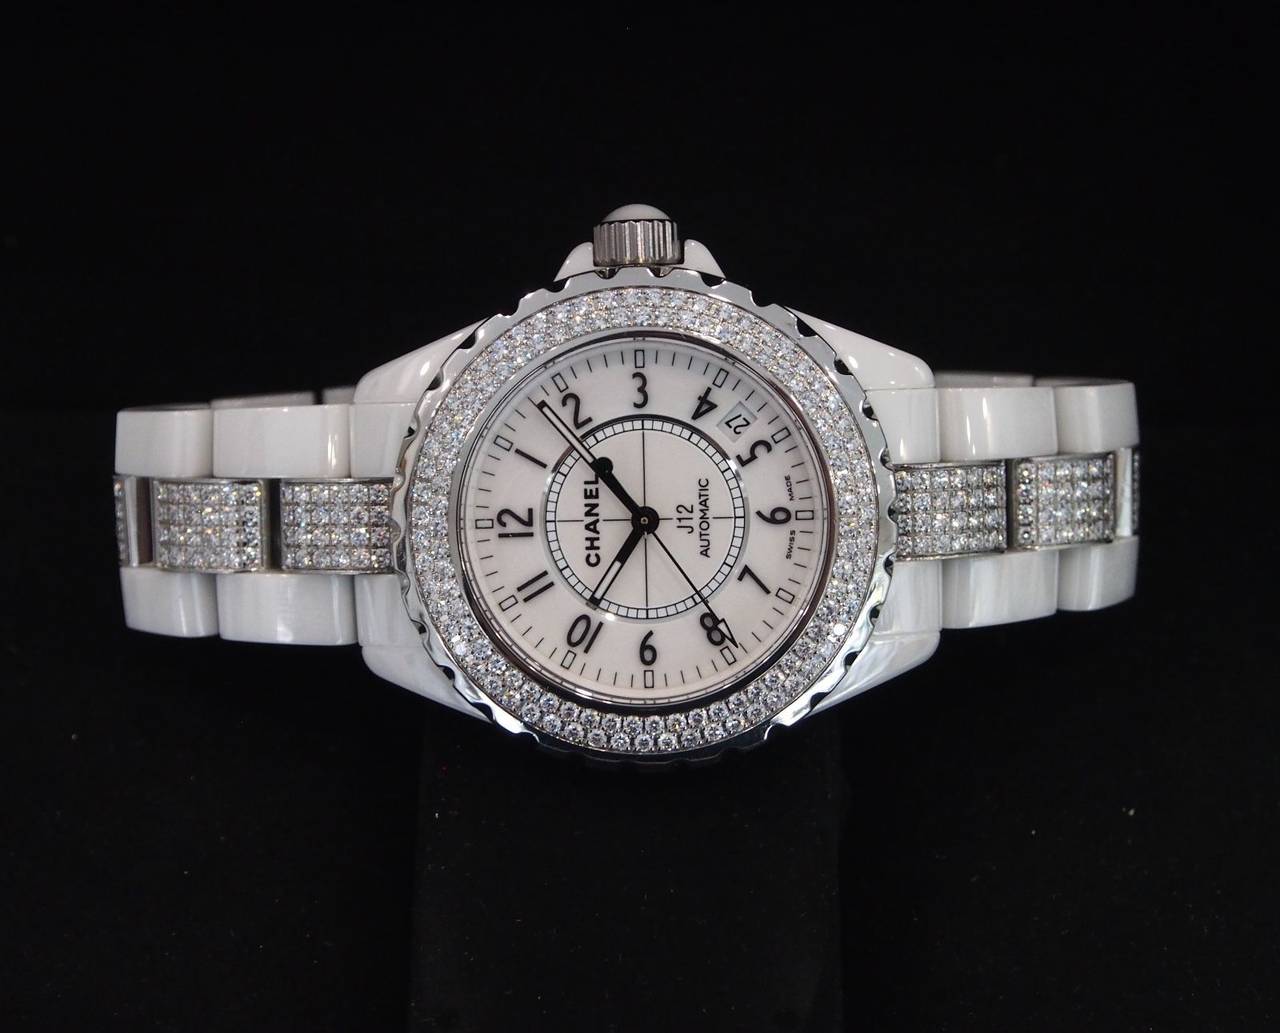 Brand Name  Chanel  
Style Number  H1422  
Also Called  H 1422  
Series  J12 Automatic  
Gender  Lady's  
Case Material  Ceramic  
Dial Color  White  
Movement  Automatic  
Functions  Hours, Minutes, Center Seconds, Date  
Crystal Material 